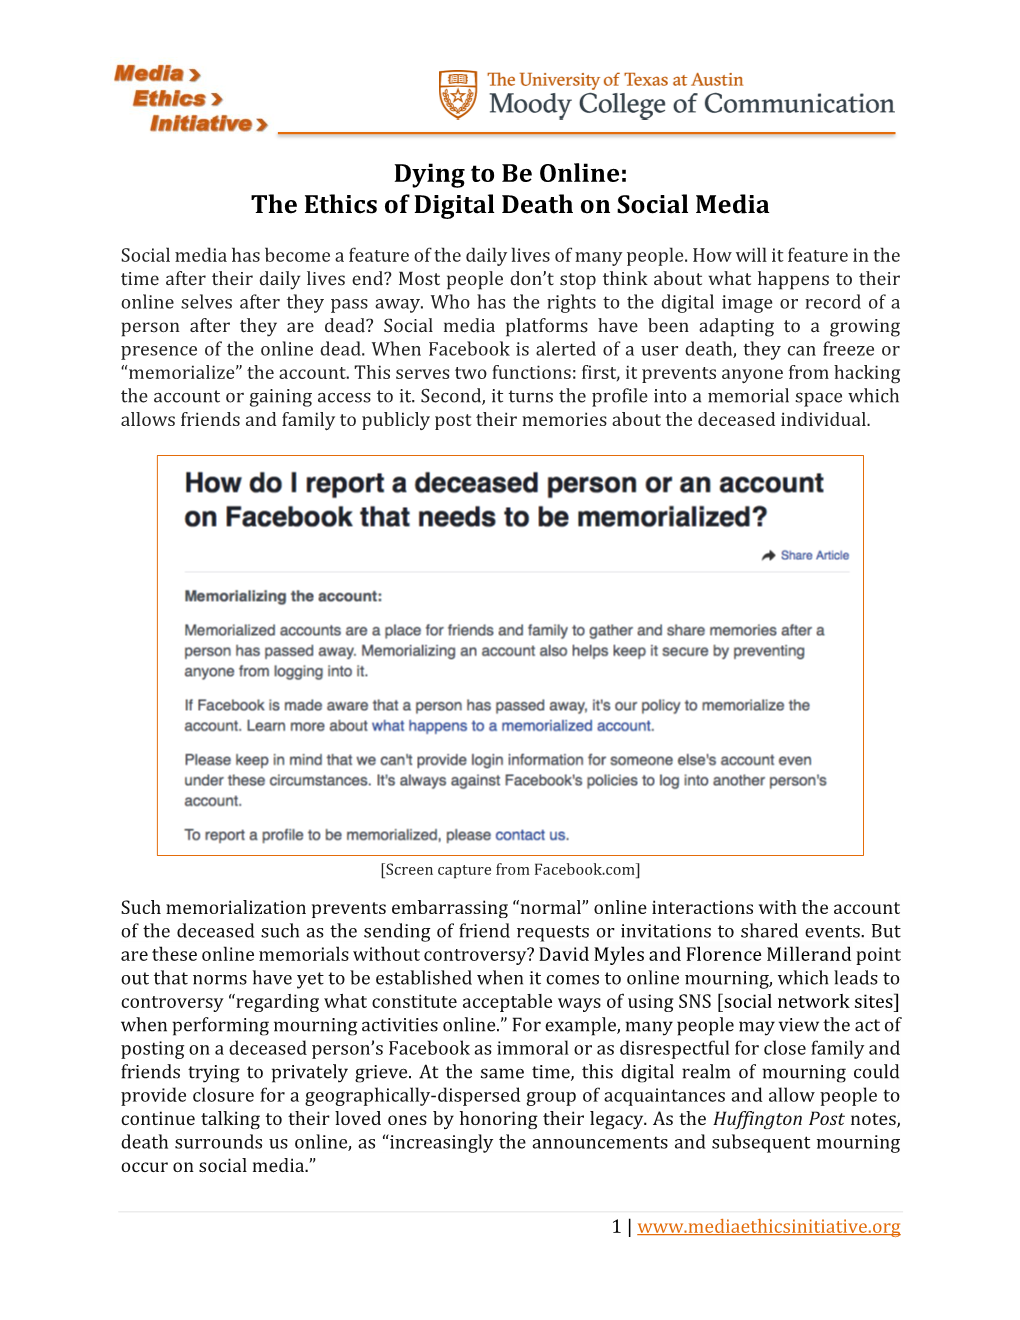 Dying to Be Online: the Ethics of Digital Death on Social Media